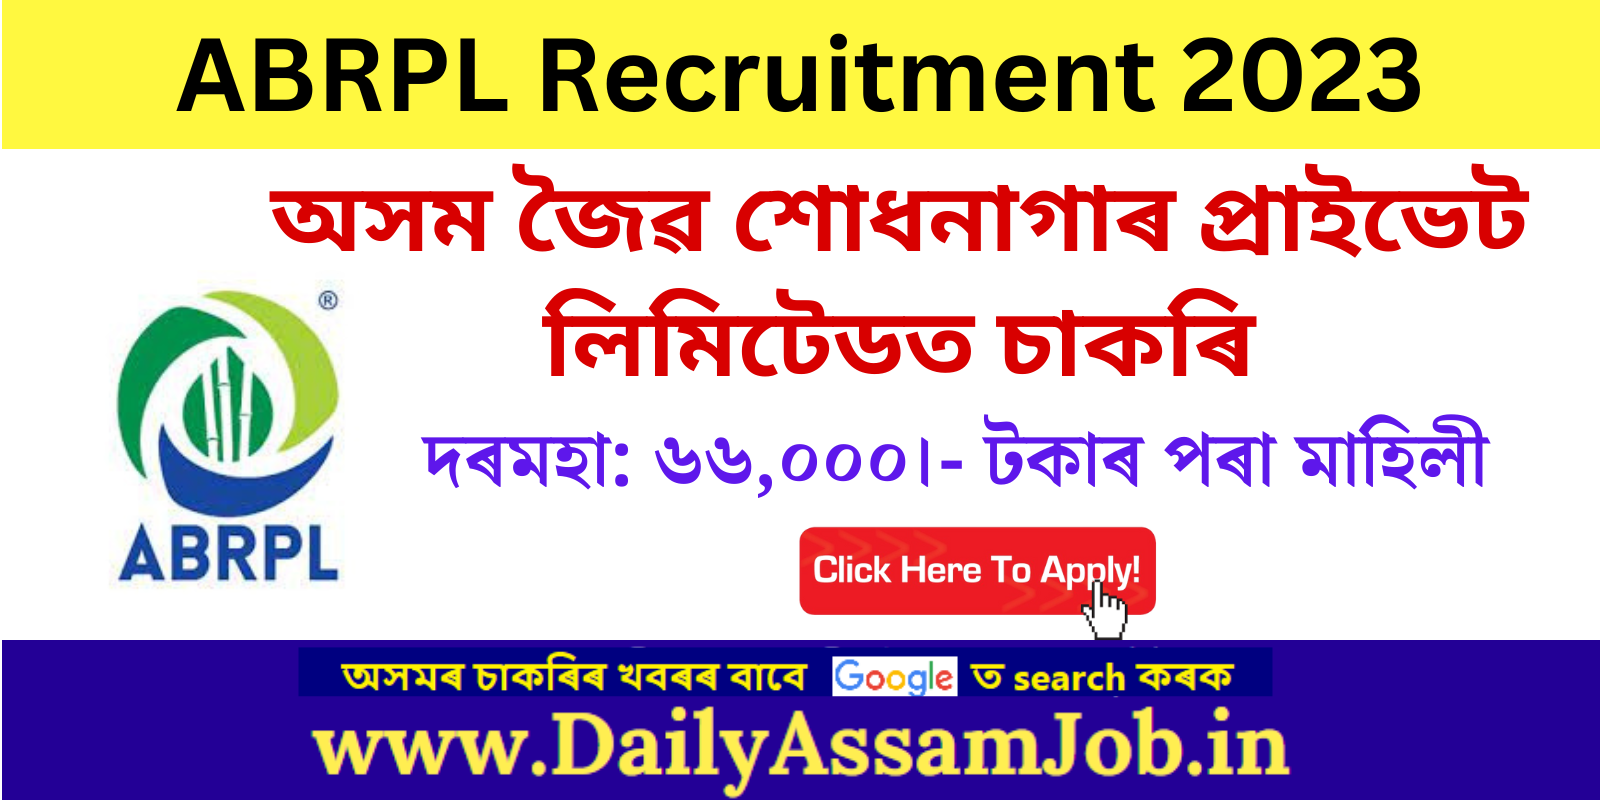 Assam Career :: Assam Bio Refinery Private Limited Recruitment 2023 for 9 Vacancy